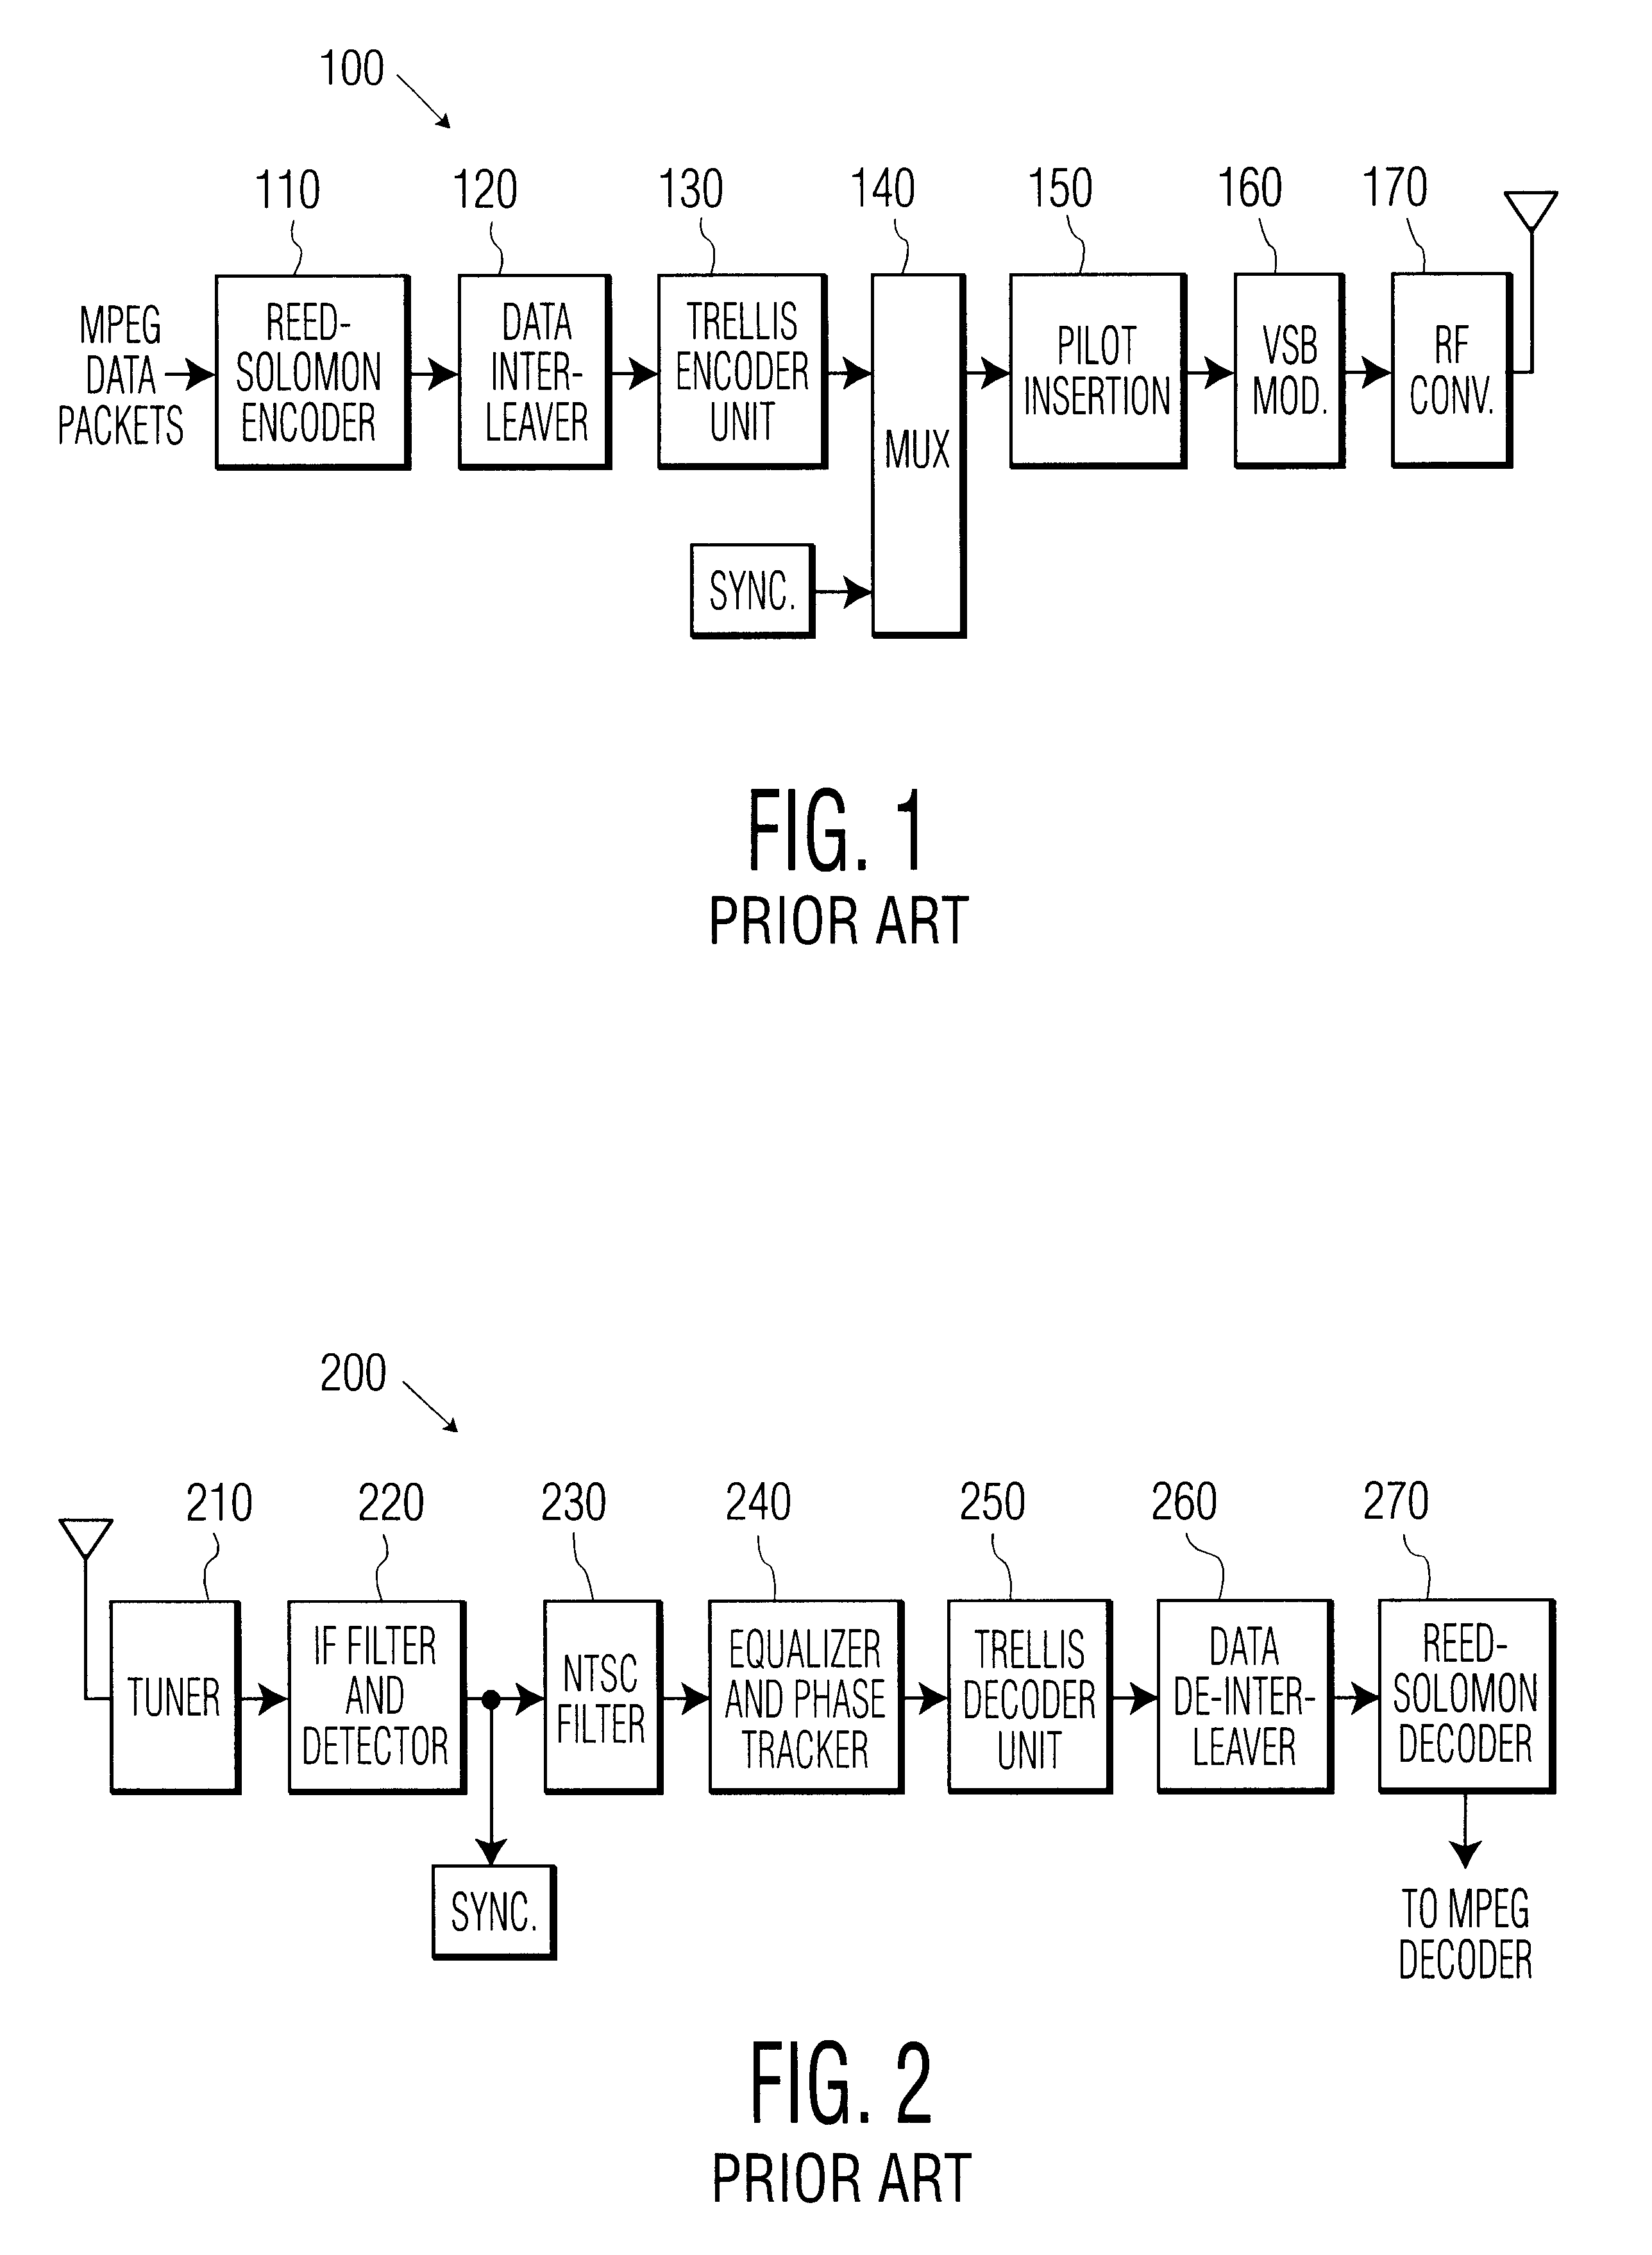 Generation of decision feedback equalizer data using trellis decoder traceback output in an ATSC HDTV receiver